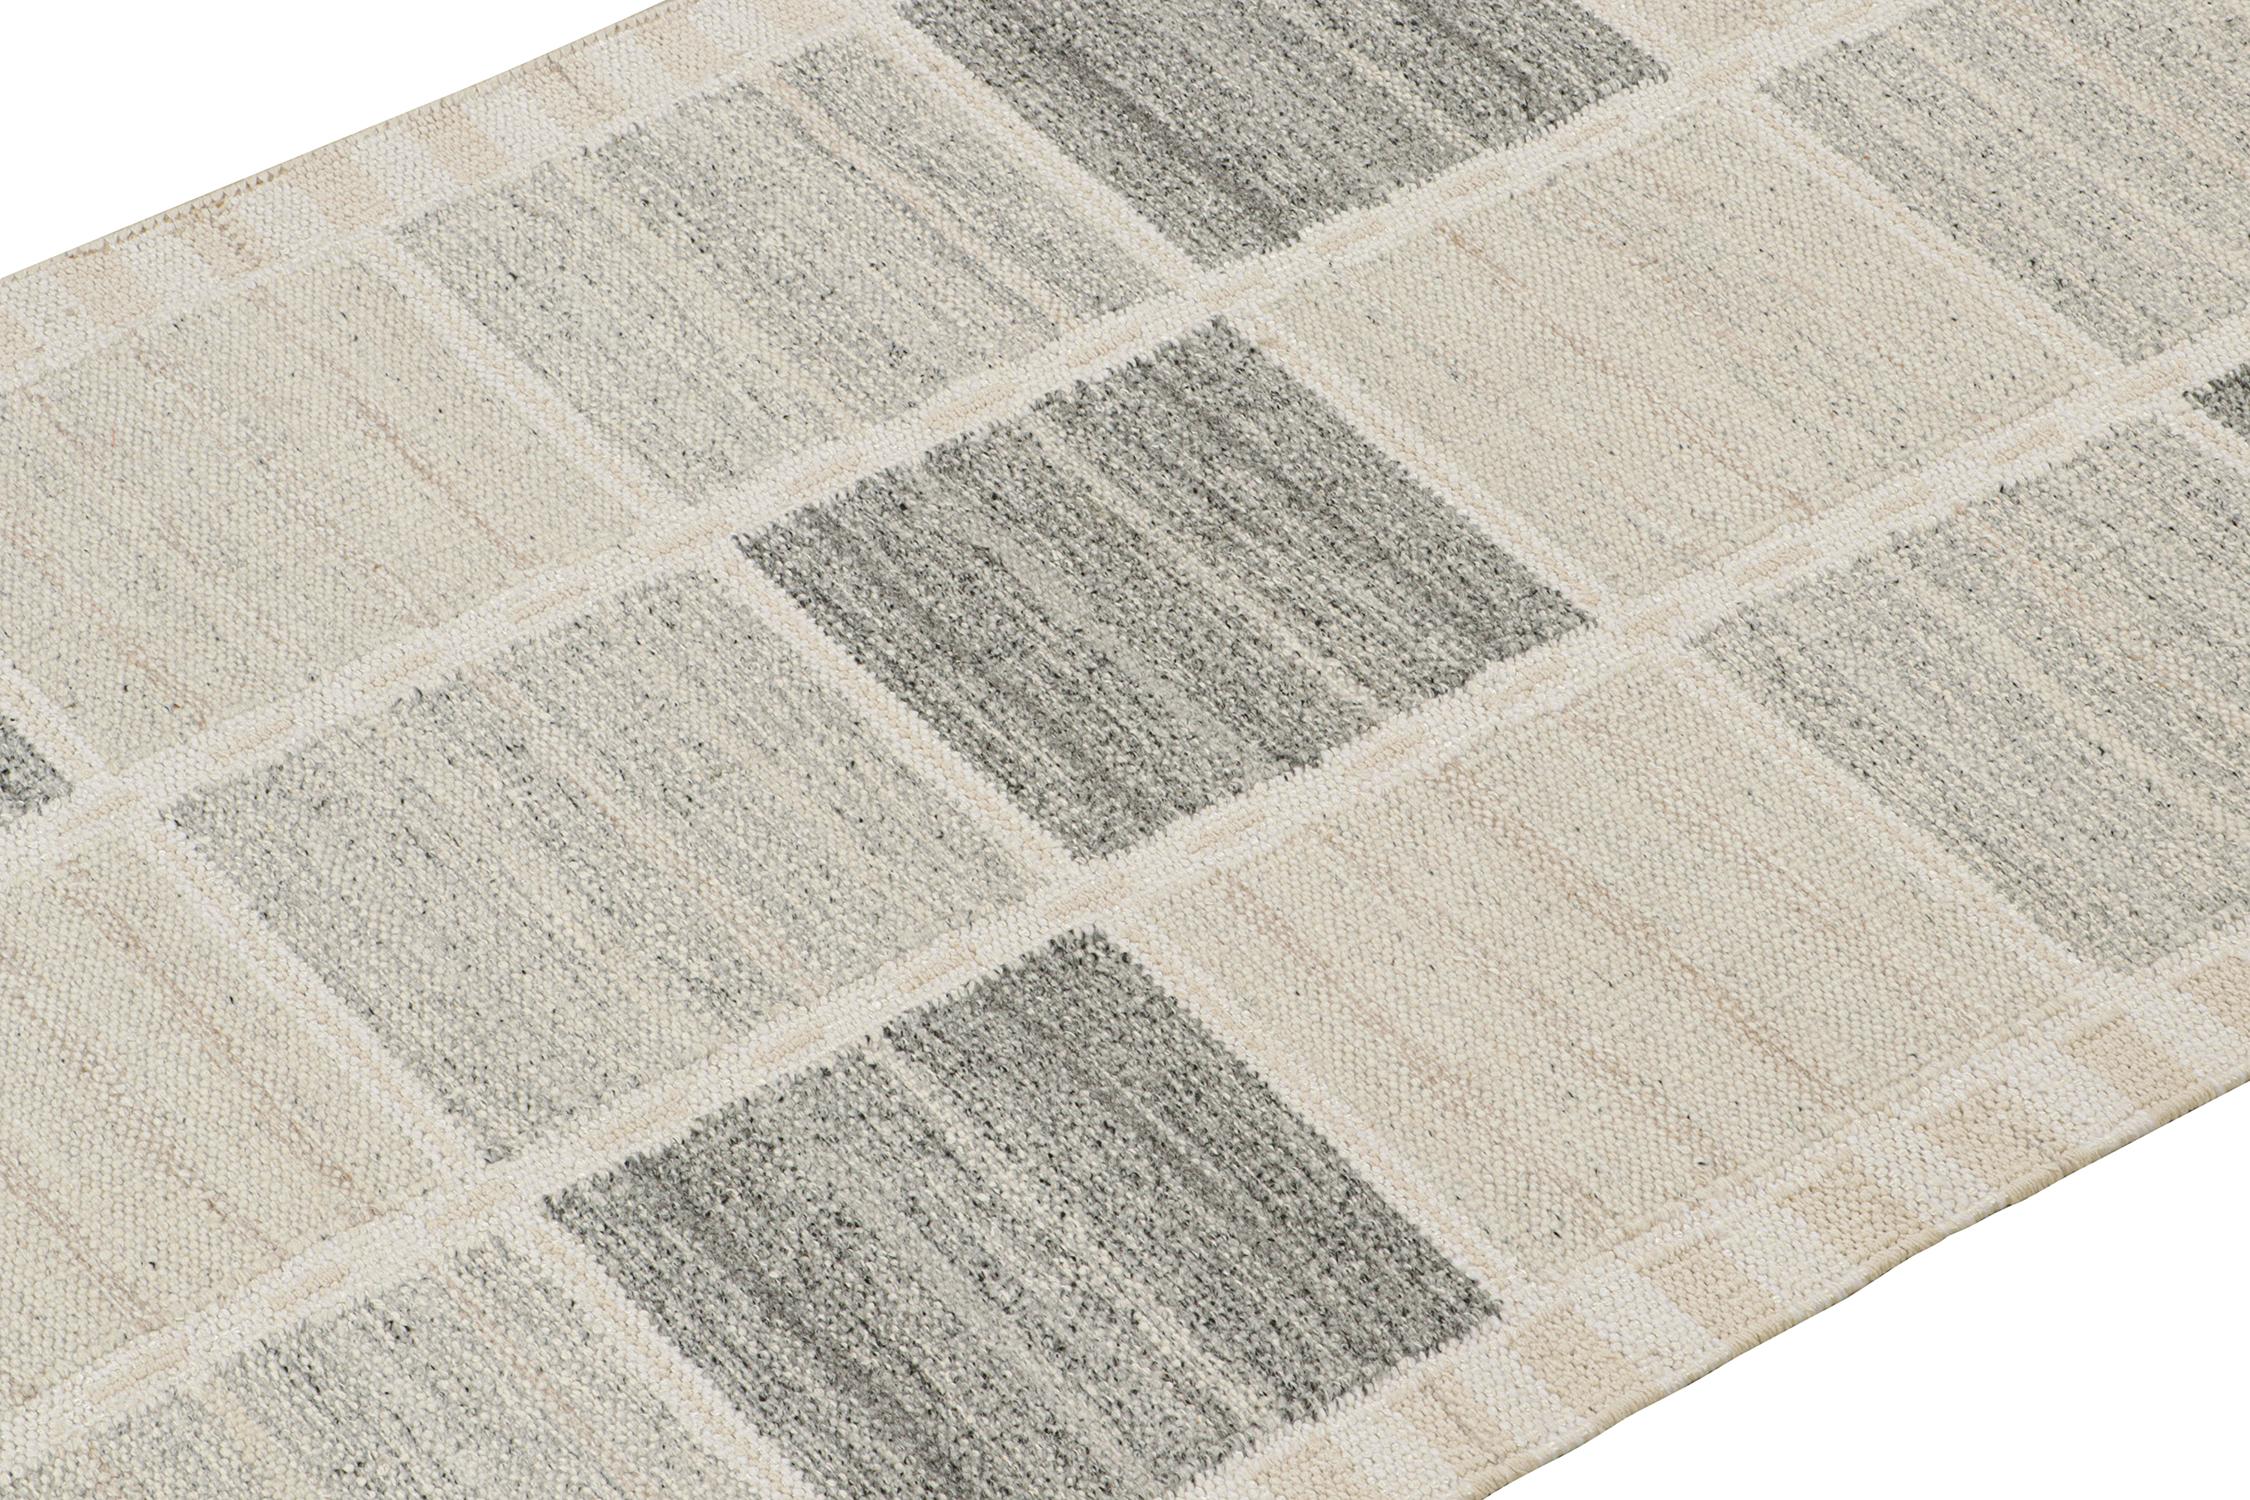 Indian Rug & Kilim’s Scandinavian Style Kilim in Off-White and Grey Geometric Patterns For Sale